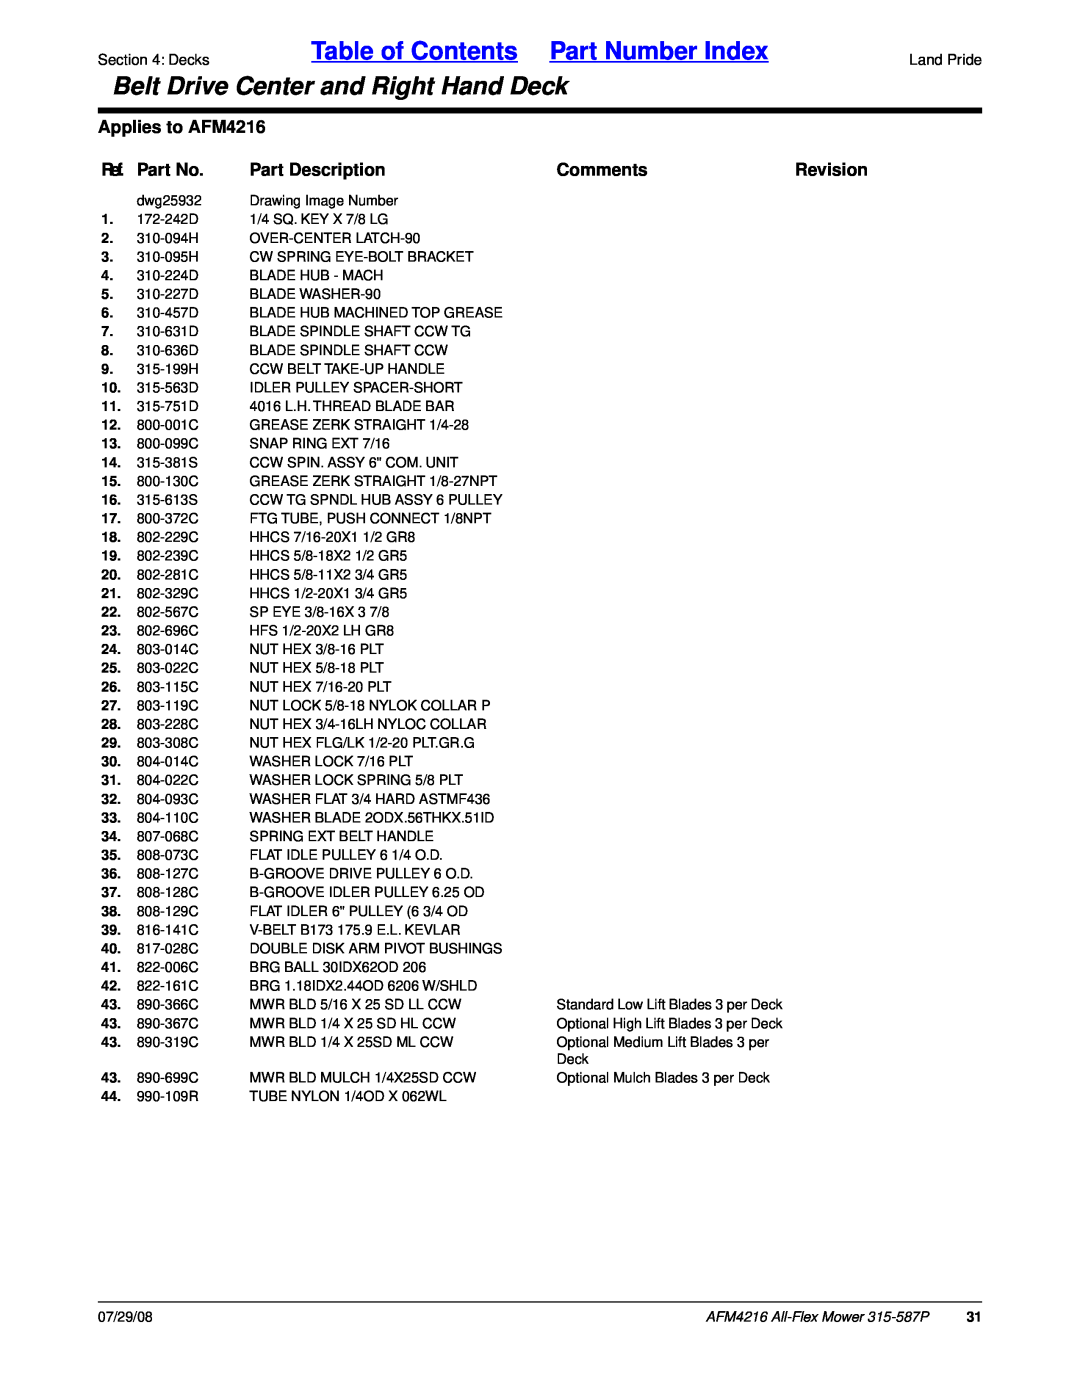 Land Pride Table of Contents Part Number Index, Belt Drive Center and Right Hand Deck, Applies to AFM4216, Ref. Part No 